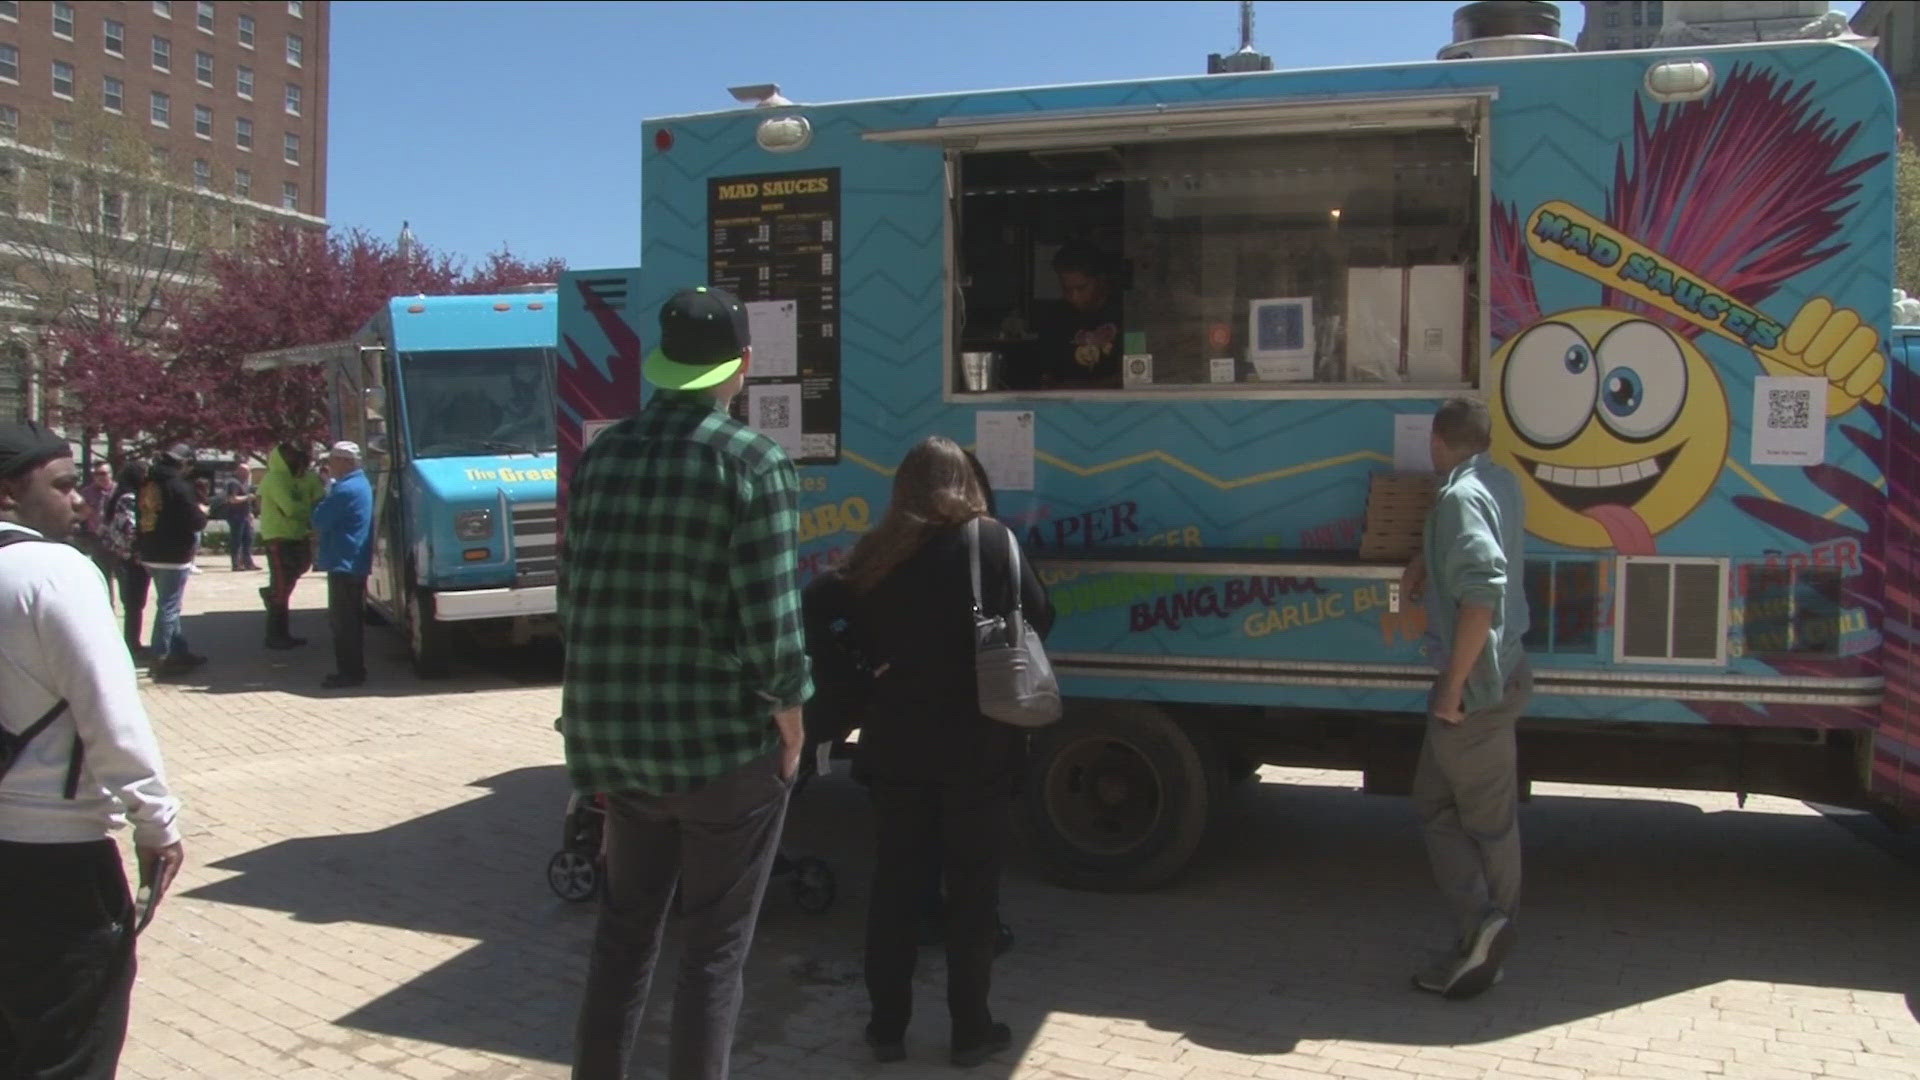 This year there are 24 food trucks taking part in the program